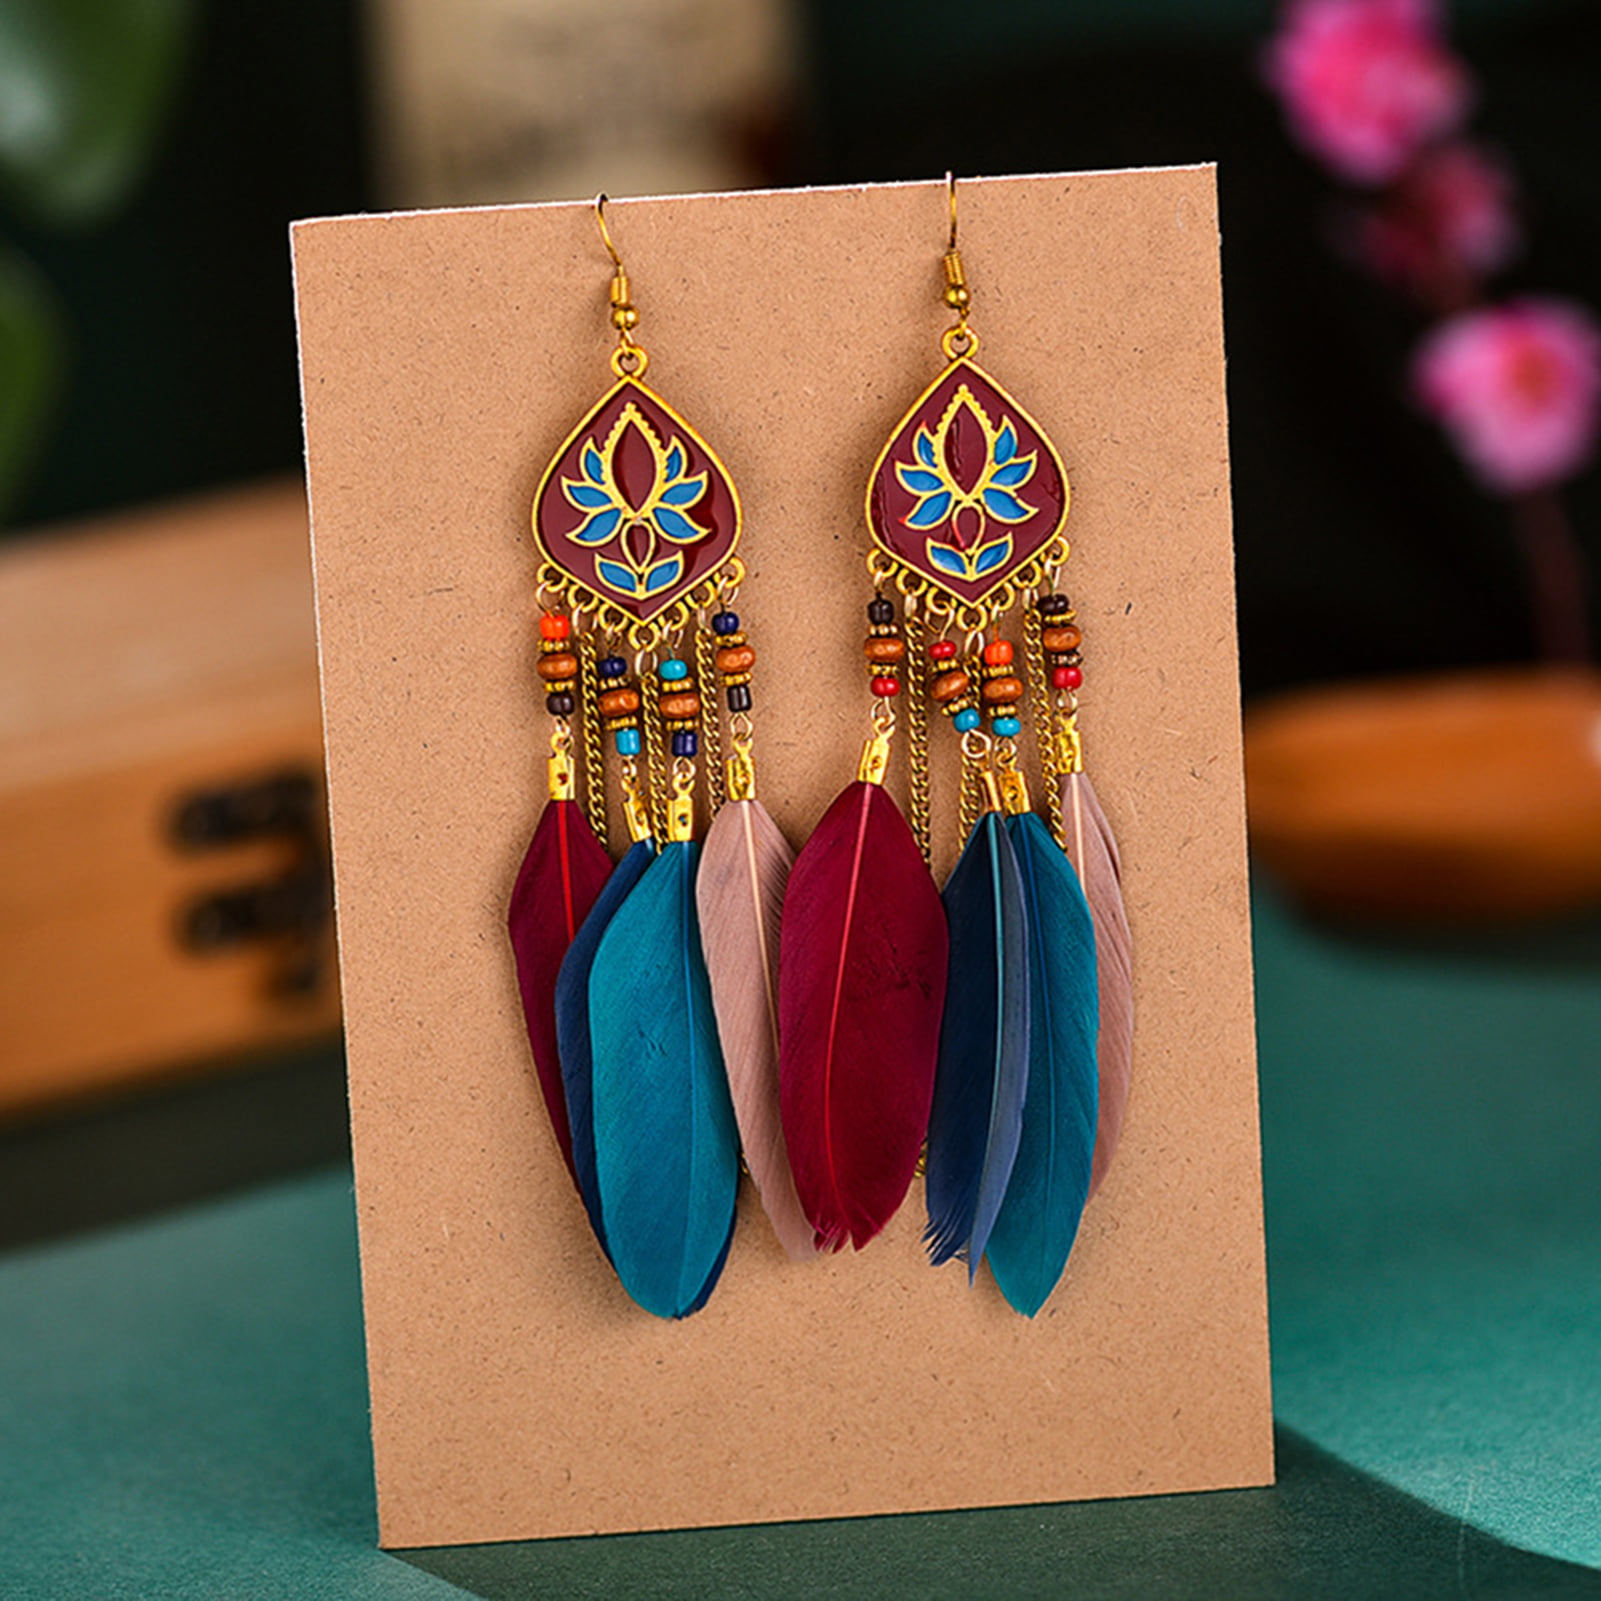 Long red and golden women's earrings with feathers and fabric dream catchers  | Handmade jewelry online Cloris®